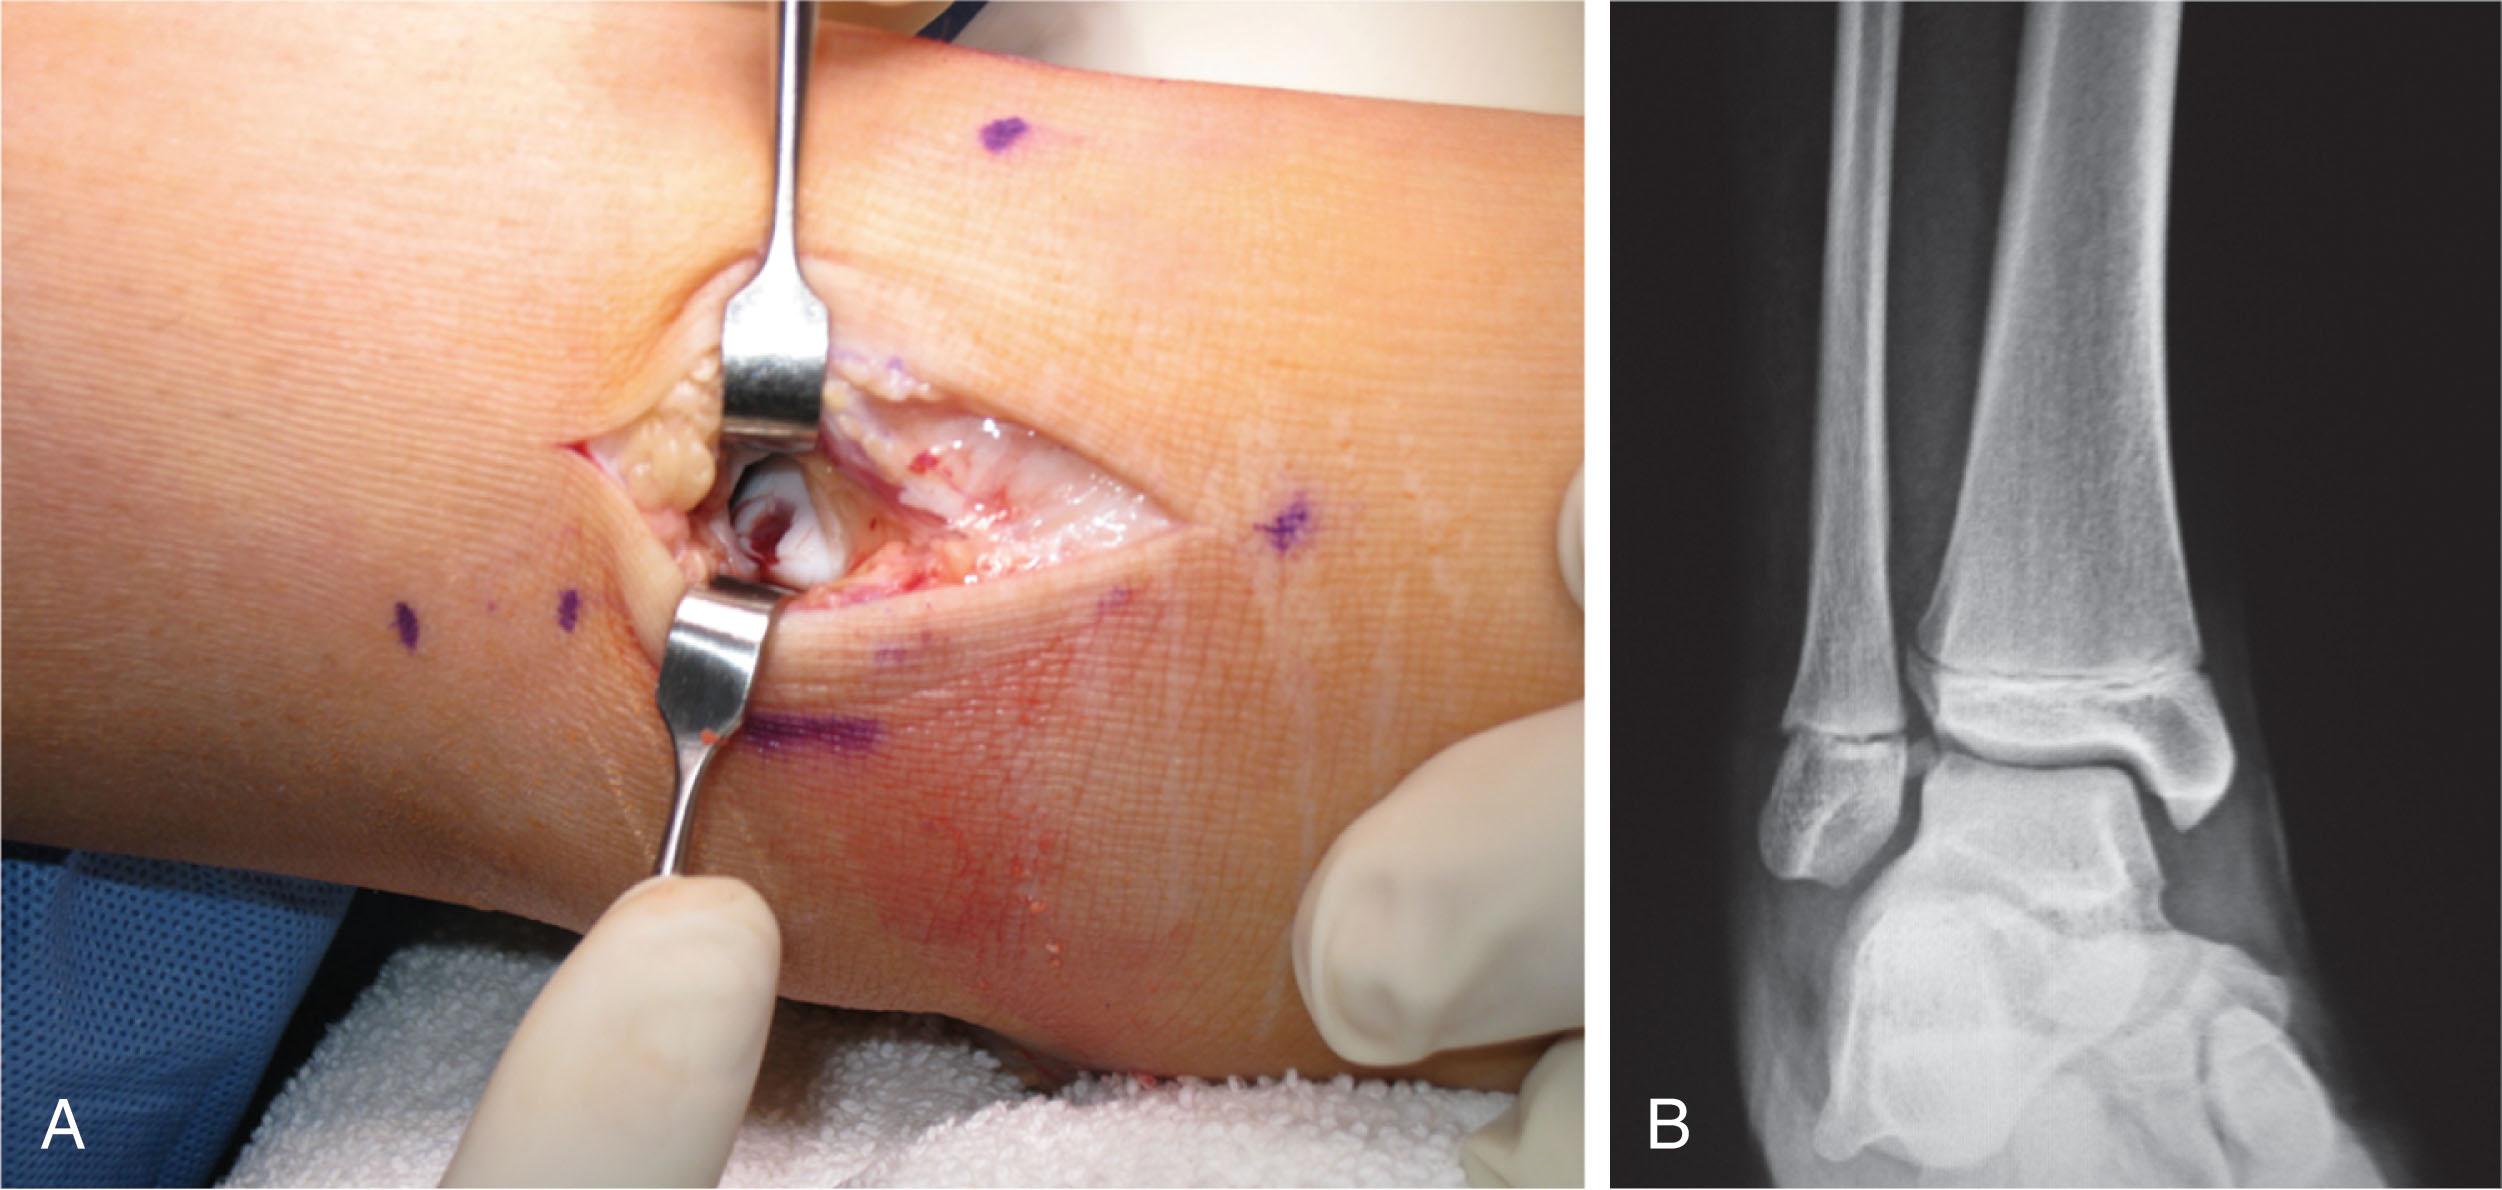 Fig. 21-3, A , Lateral talar osteochondral defect secondary to trauma. B , Anteroposterior radiograph of the free-floating fragment of the talar osteochondral defect.